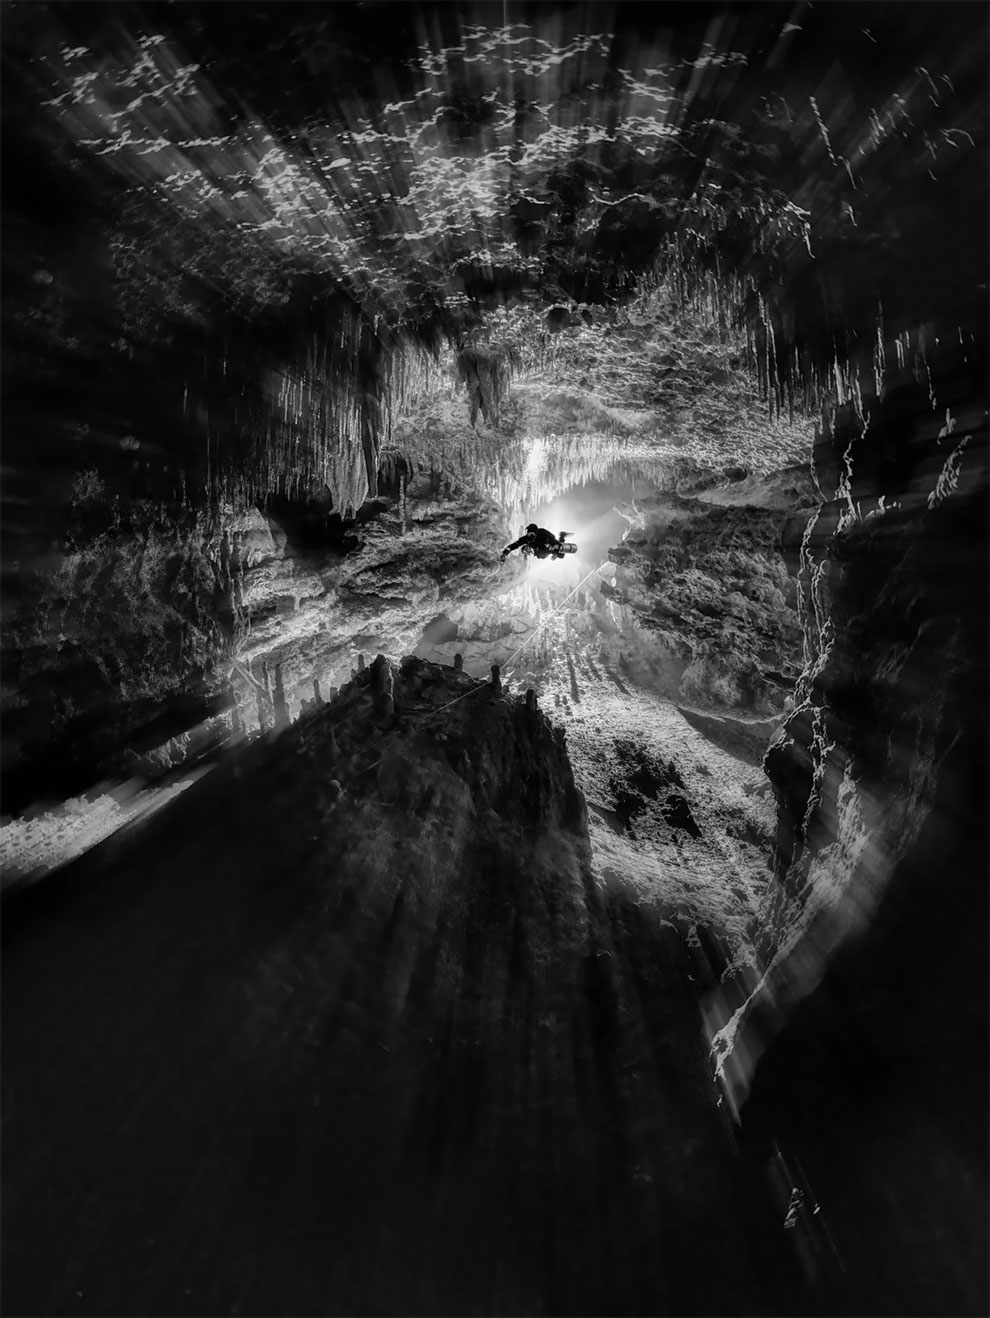 Black & white category runner-up. Time Travel by Martin Broen (US), taken in Cenote Chan Hol (Little Hole), Mexico.